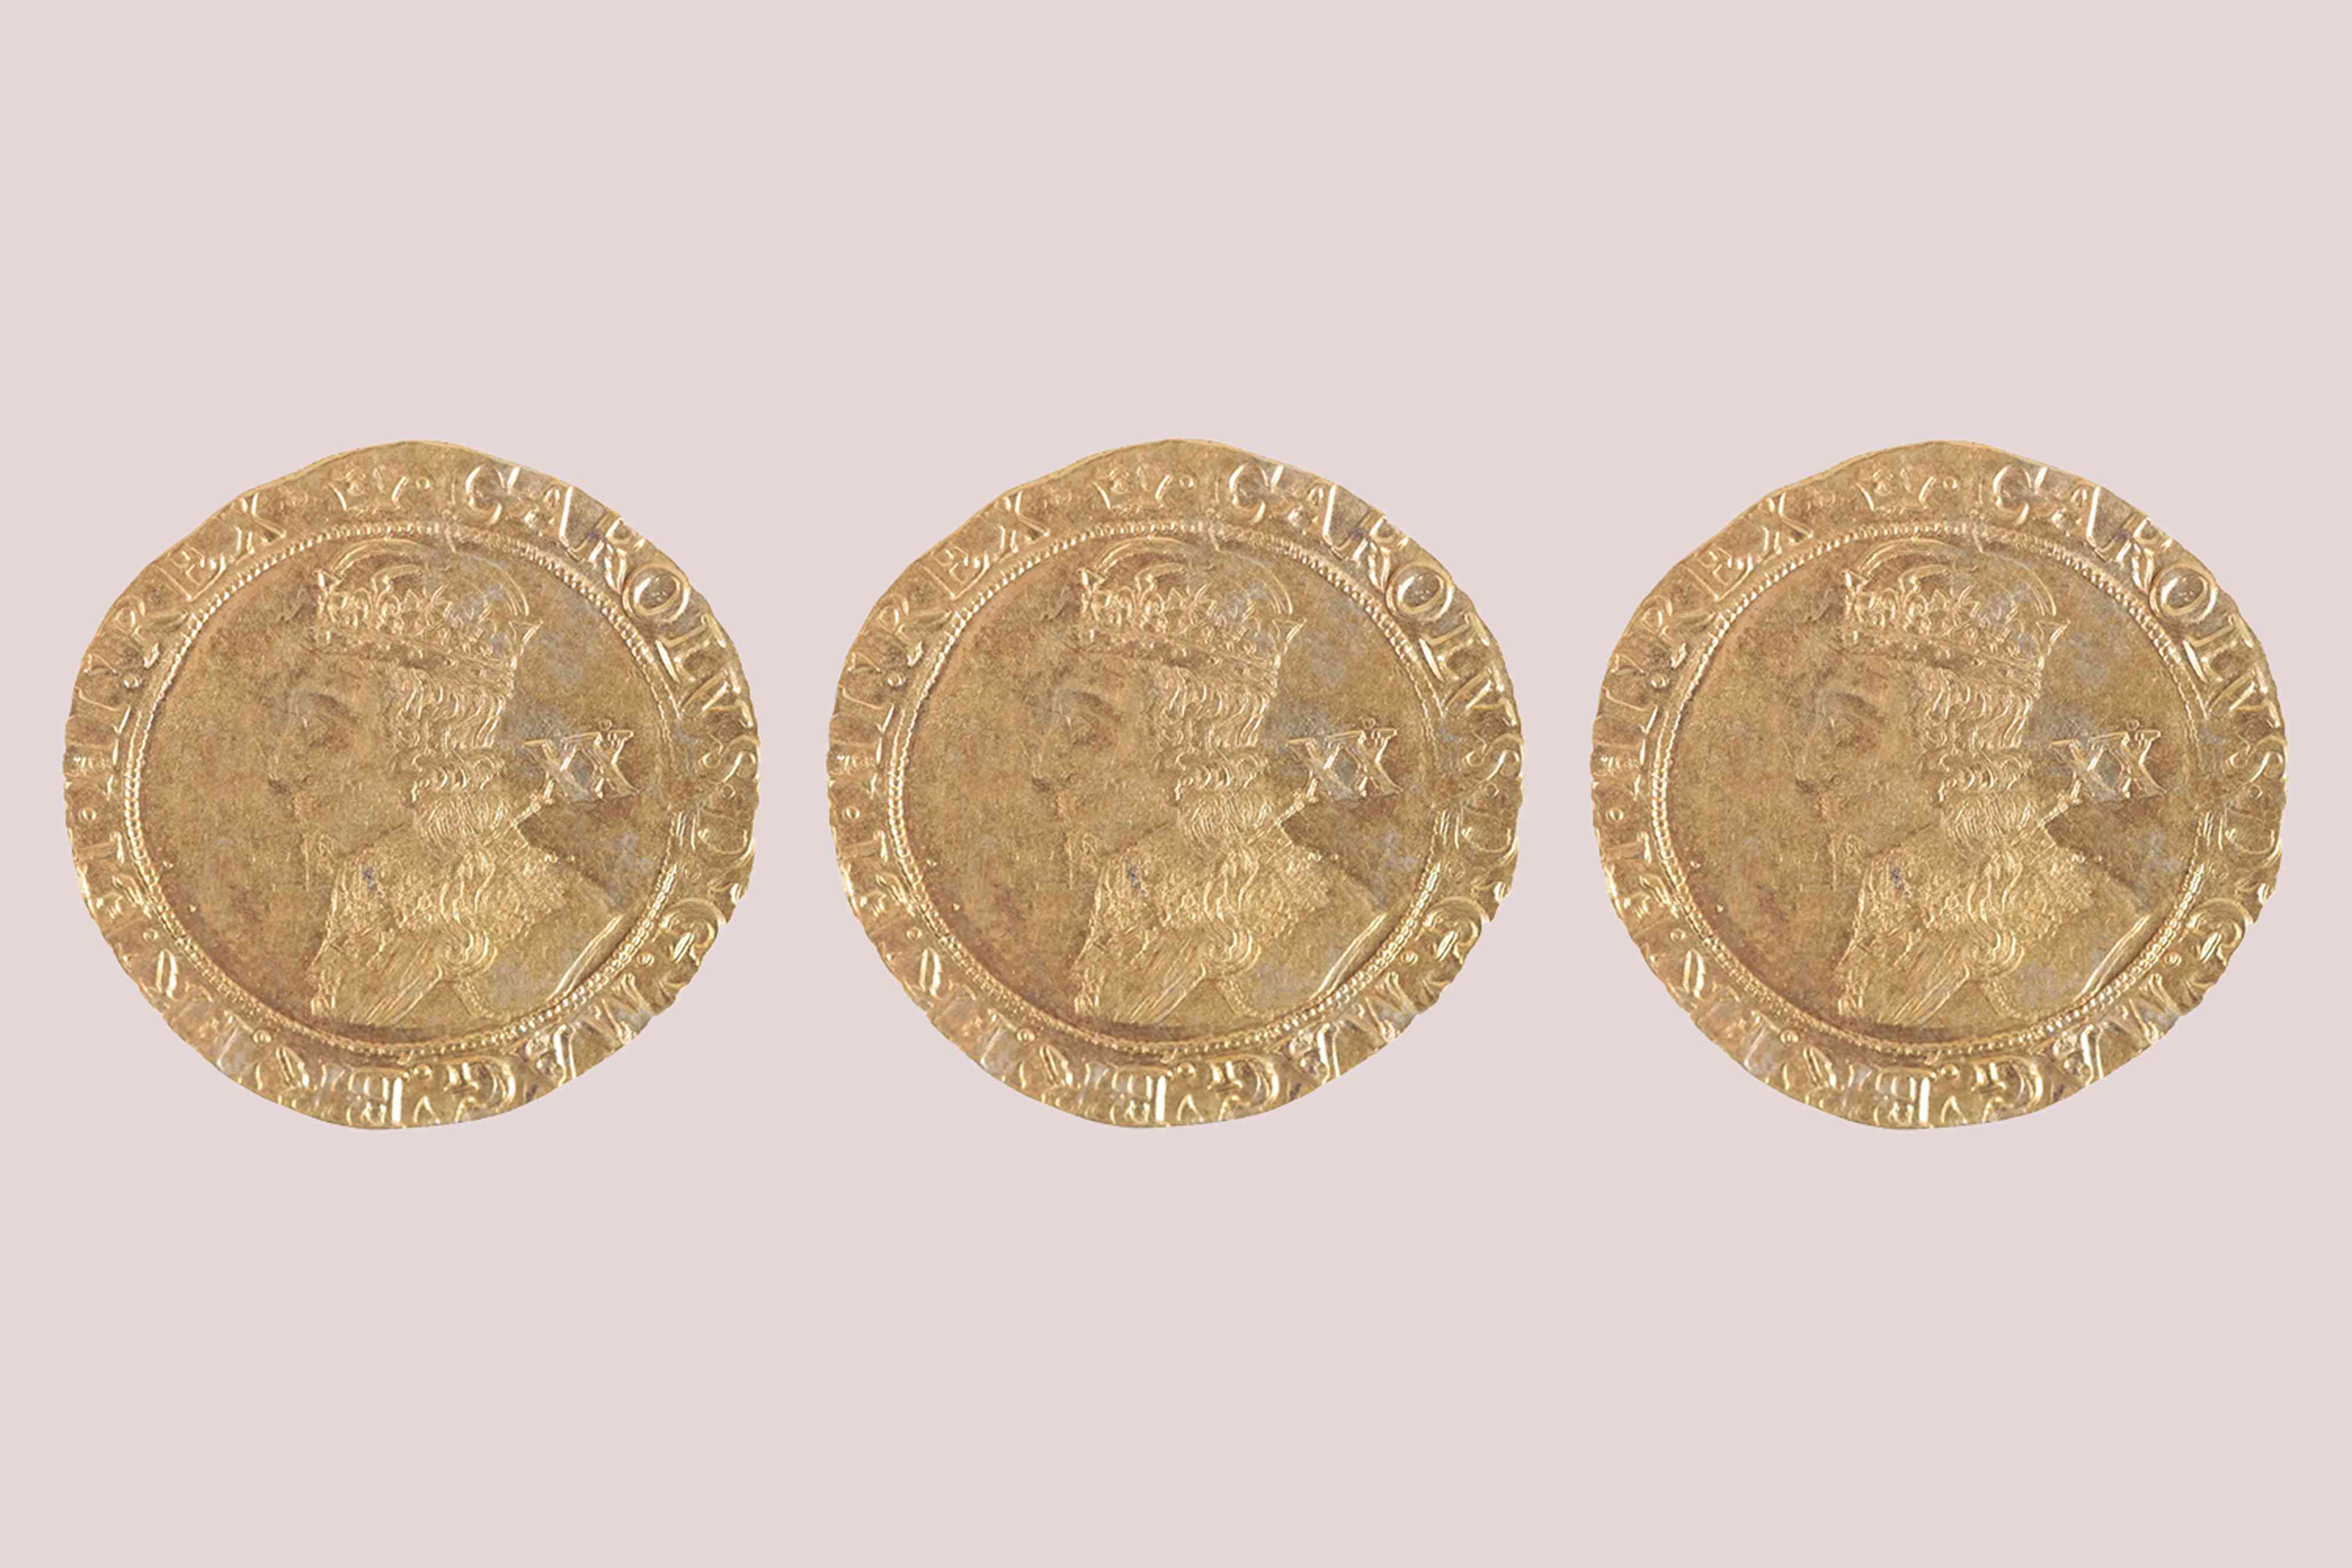 a family found 17th-century gold coins under their kitchen floorboards—and the collection just sold for $75,000